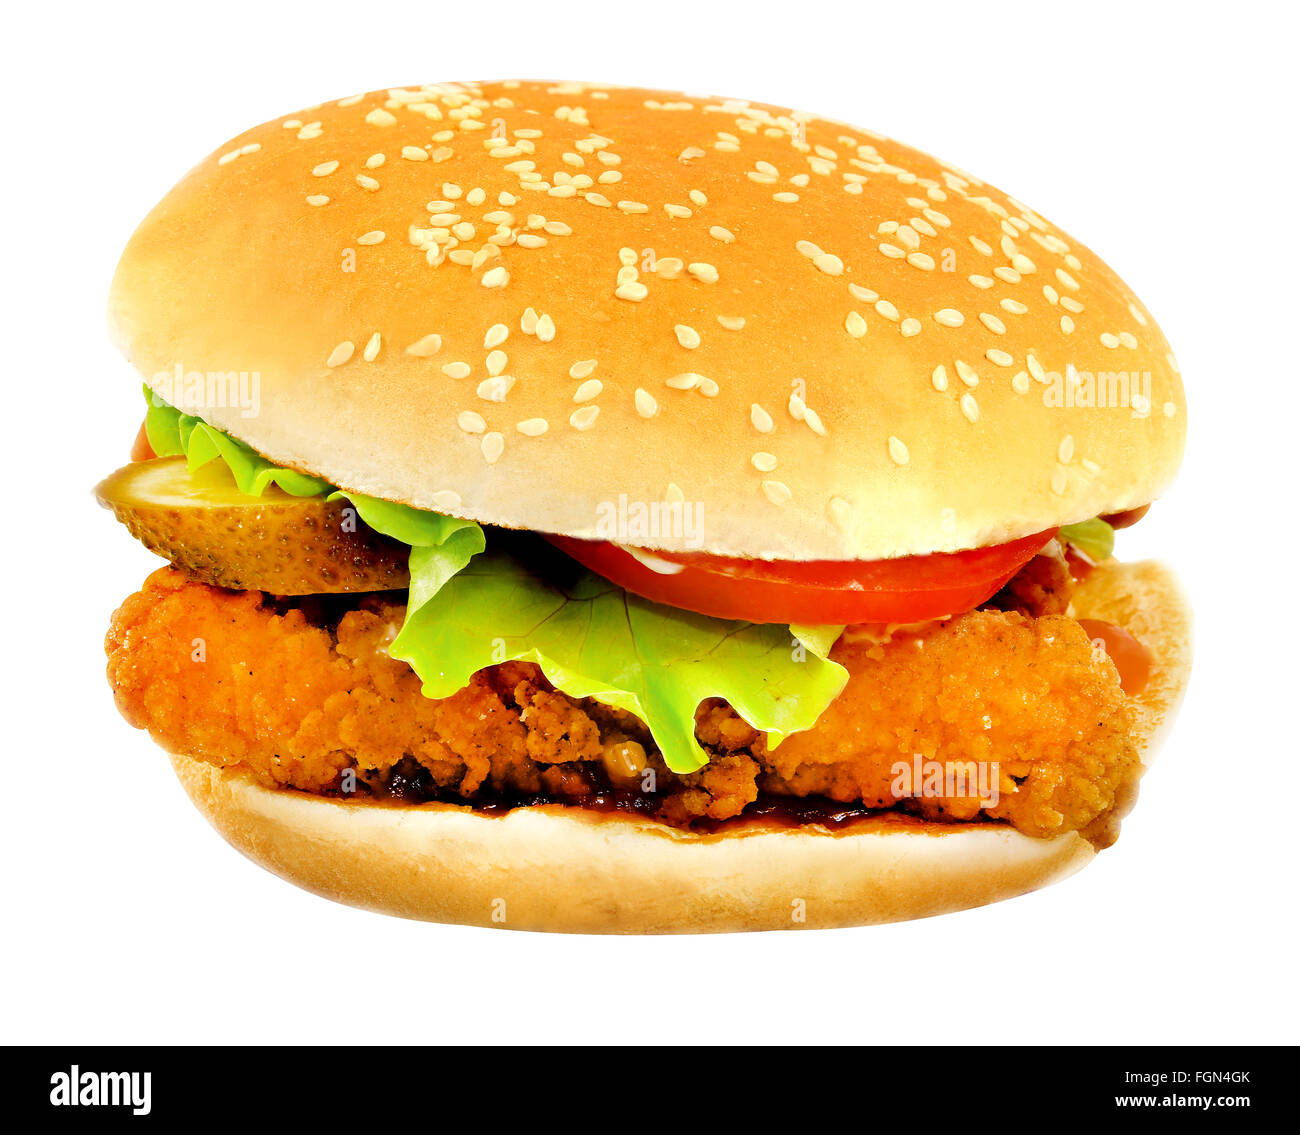 Big beautiful chicken burger on a white background Stock Photo